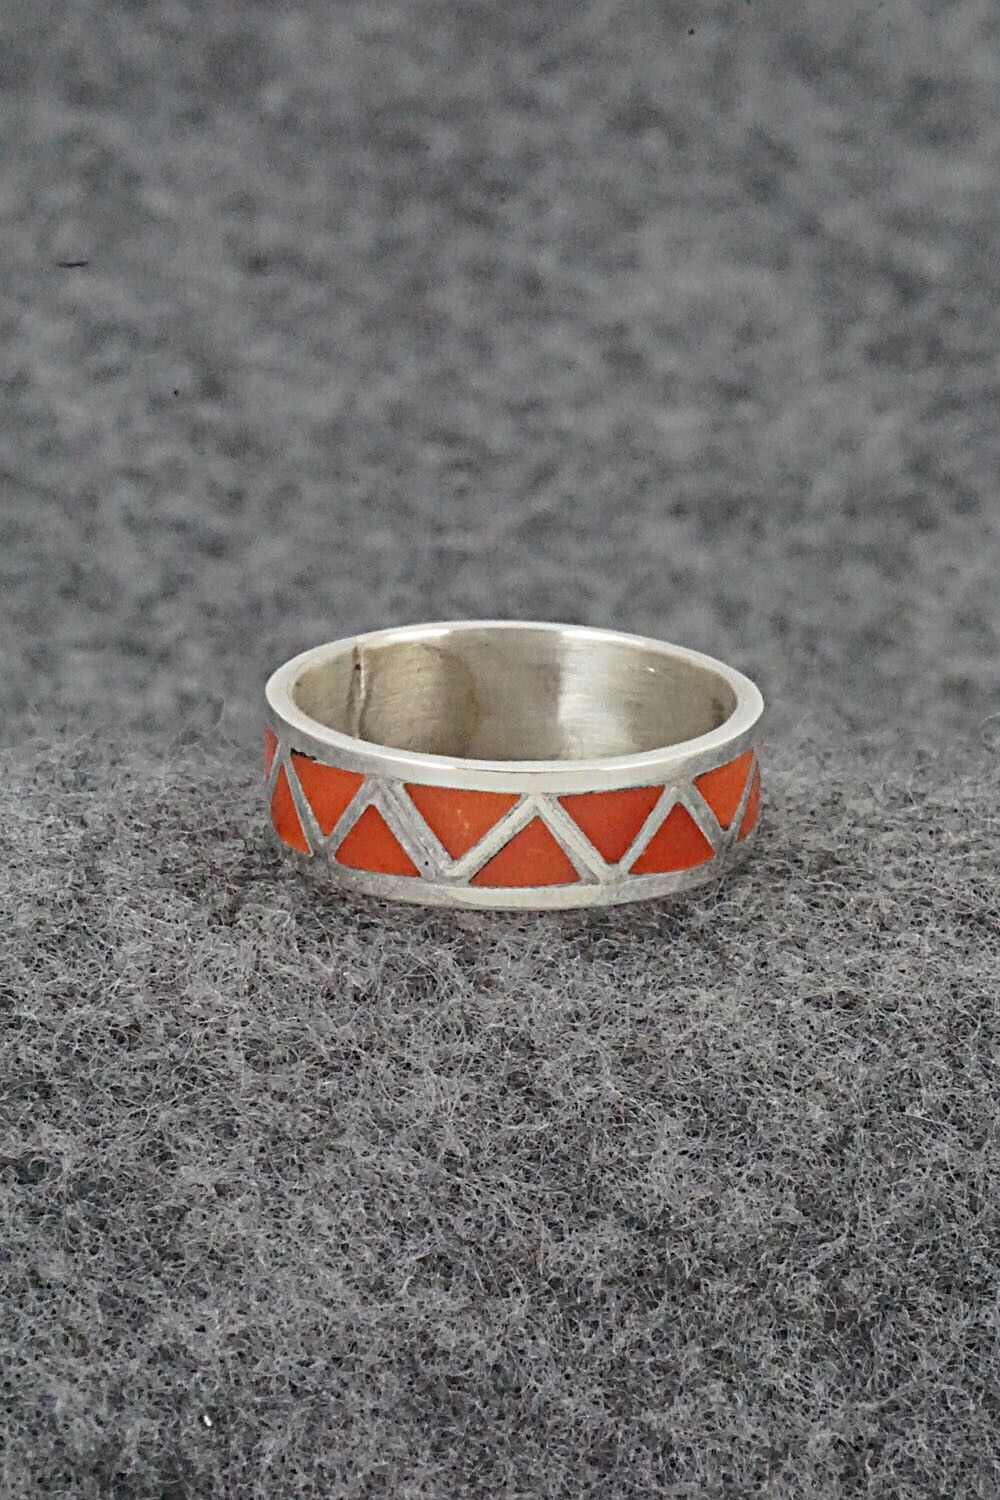 Coral & Sterling Silver Ring -Tina Haloo - Size 7.5